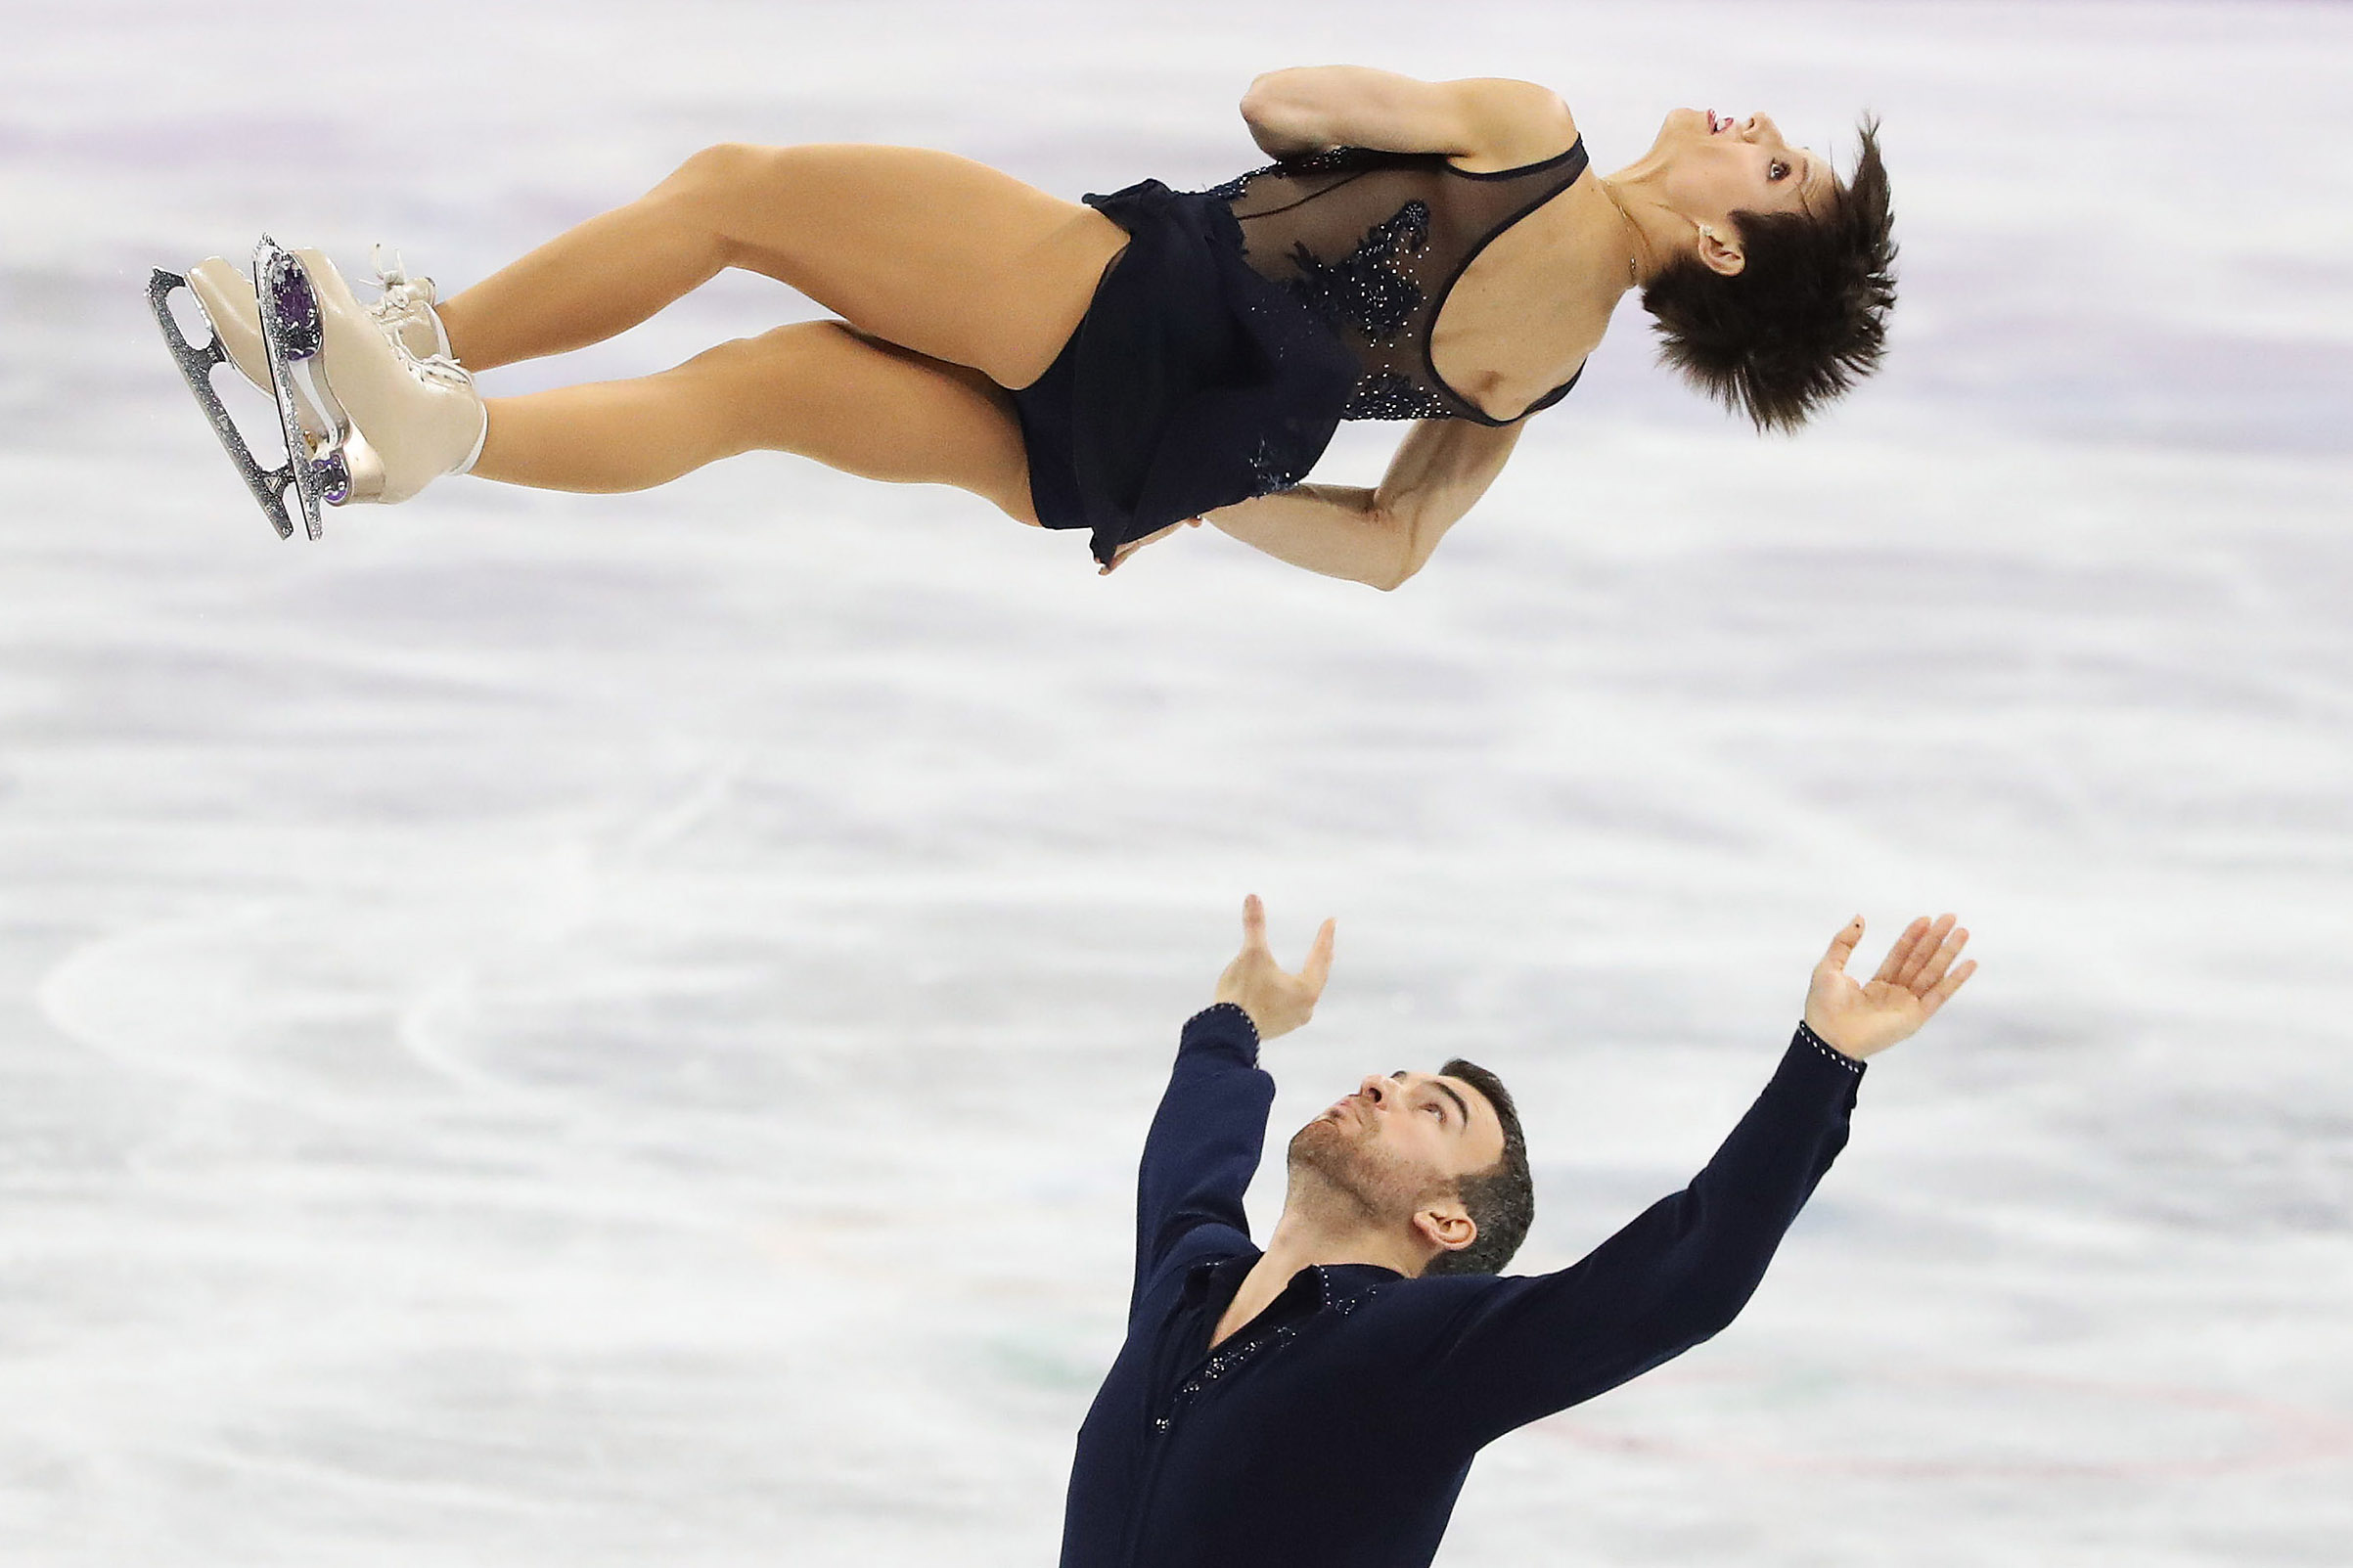 Meagan Duhamel and Eric Radford of Canada perform in the Figure Skating Pairs Short program at the PyeongChang 2018 Winter Olympics at the Gangneung Ice Arena in Gangneung in Pyeongchang in South Korea on Feb. 14, 2018. (Steve Russell—Toronto Star/Getty Images)